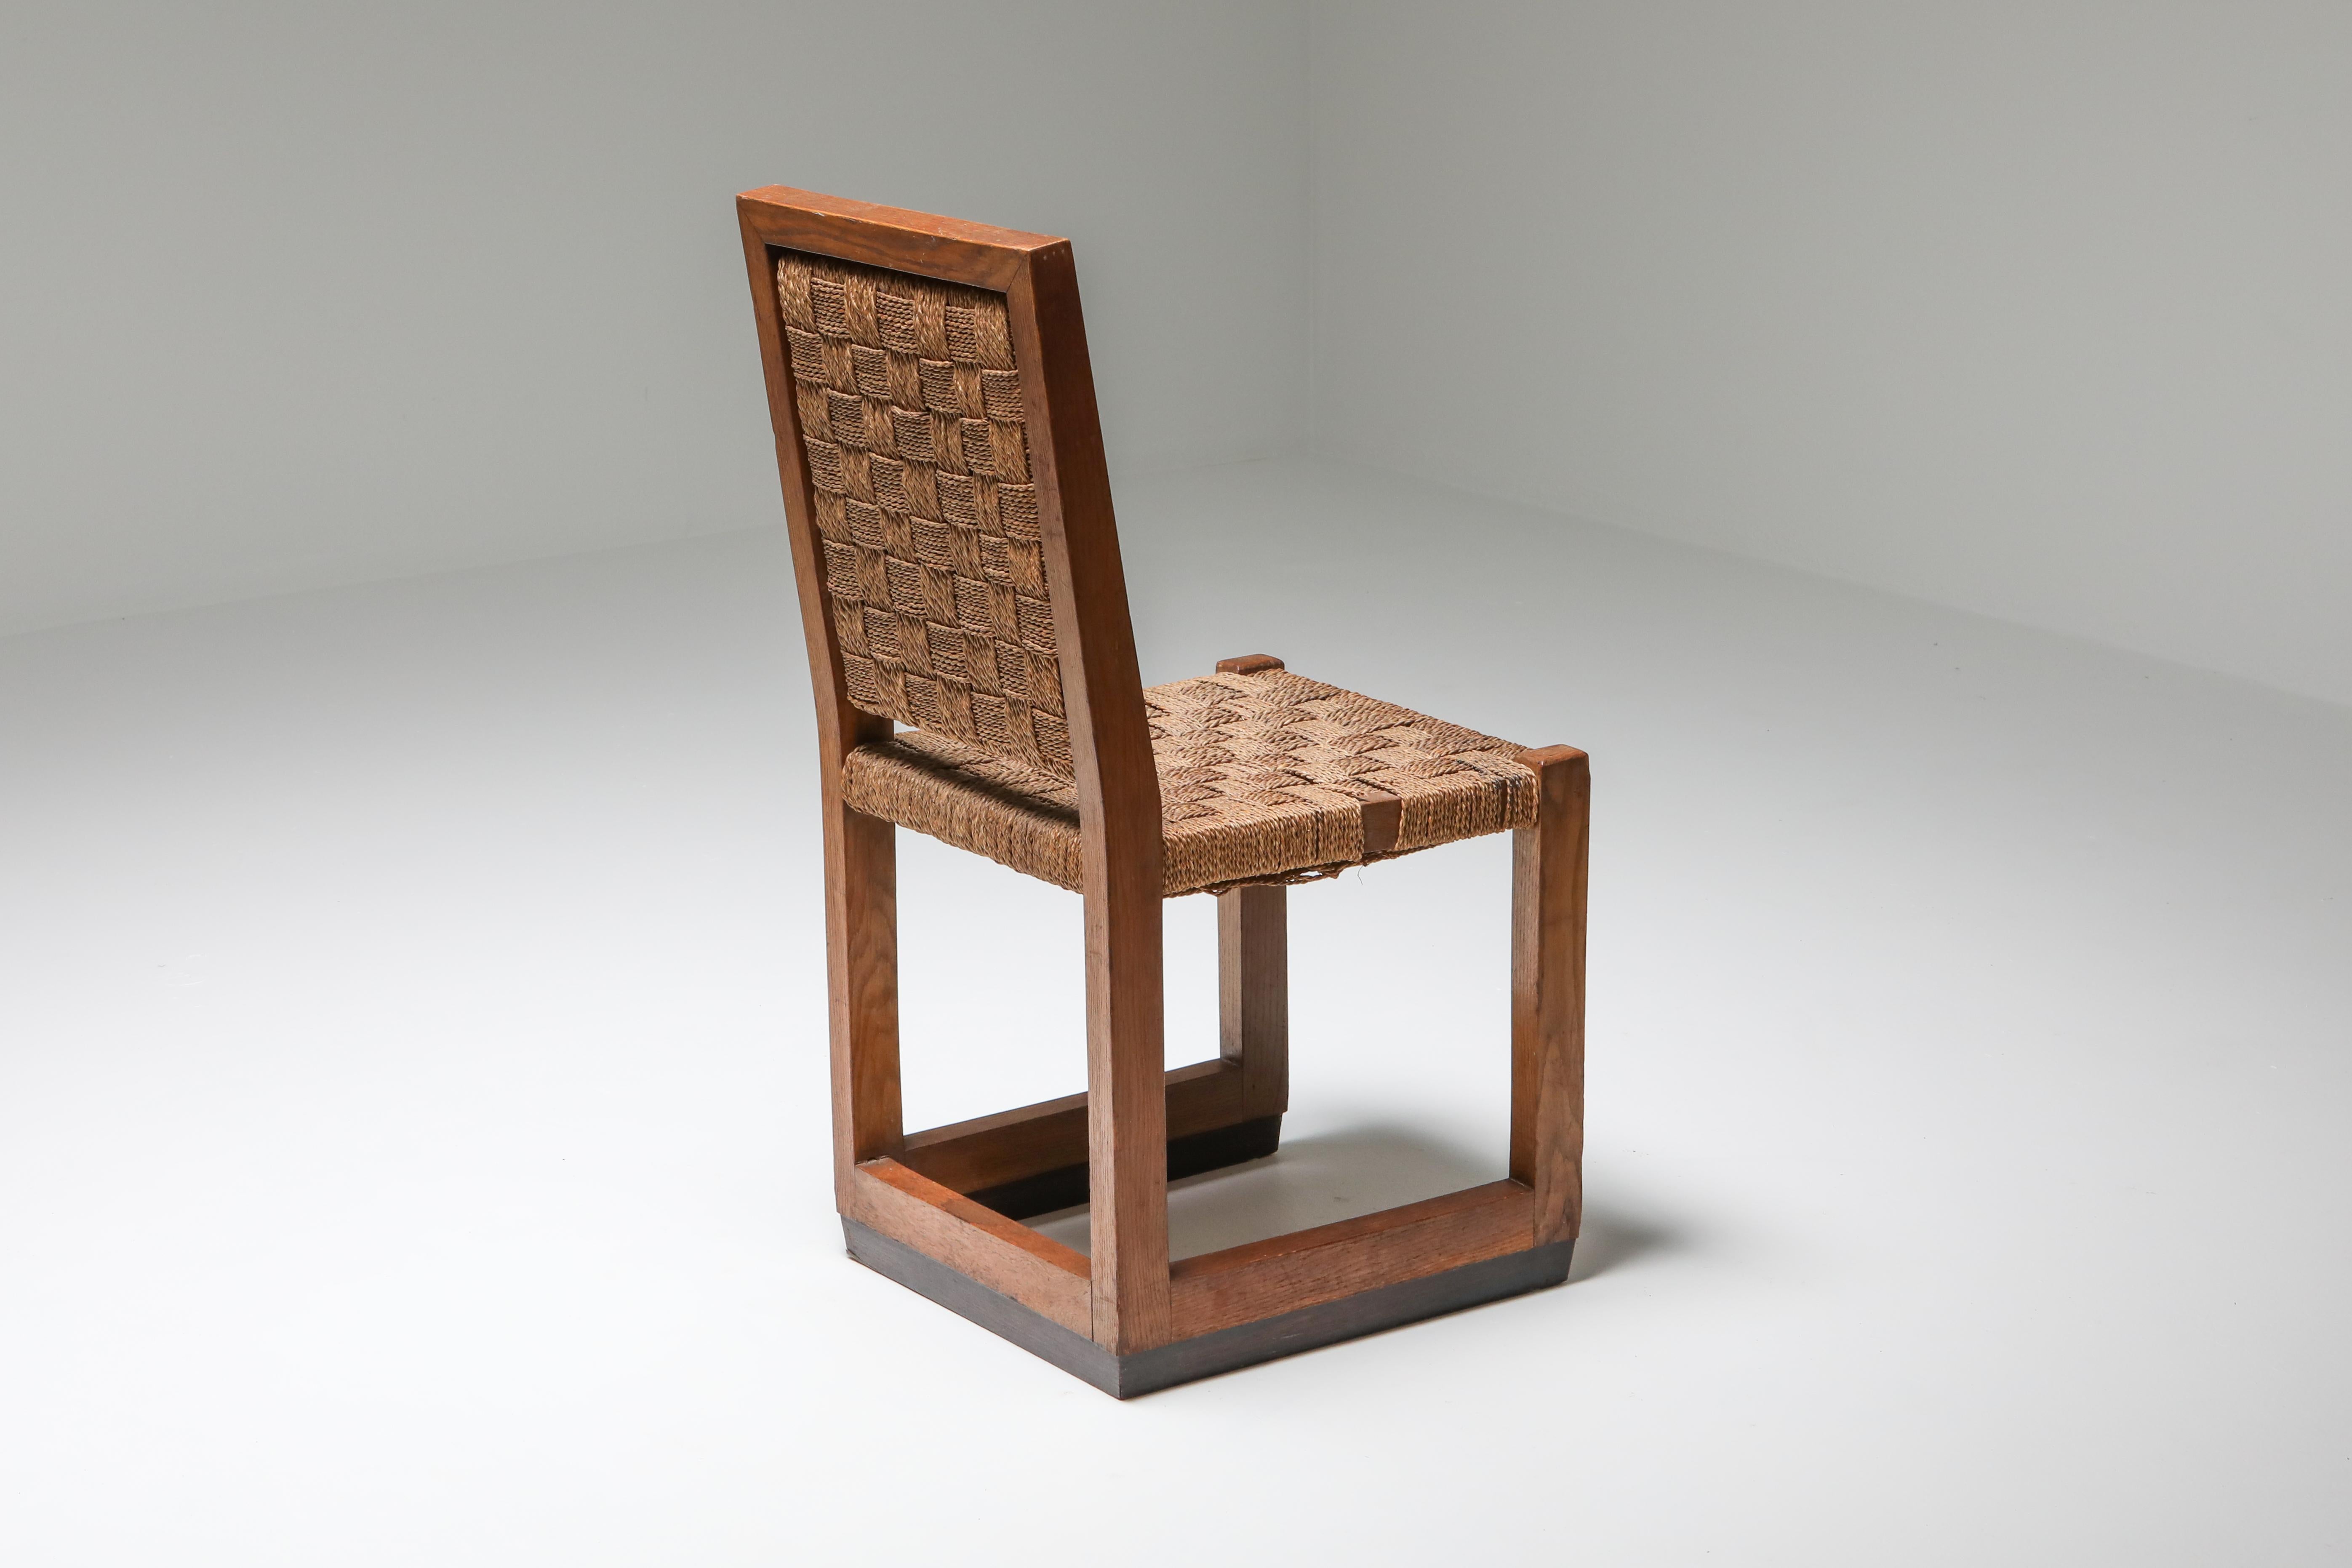 Arts and Crafts Hague School Chair with Cord Seating